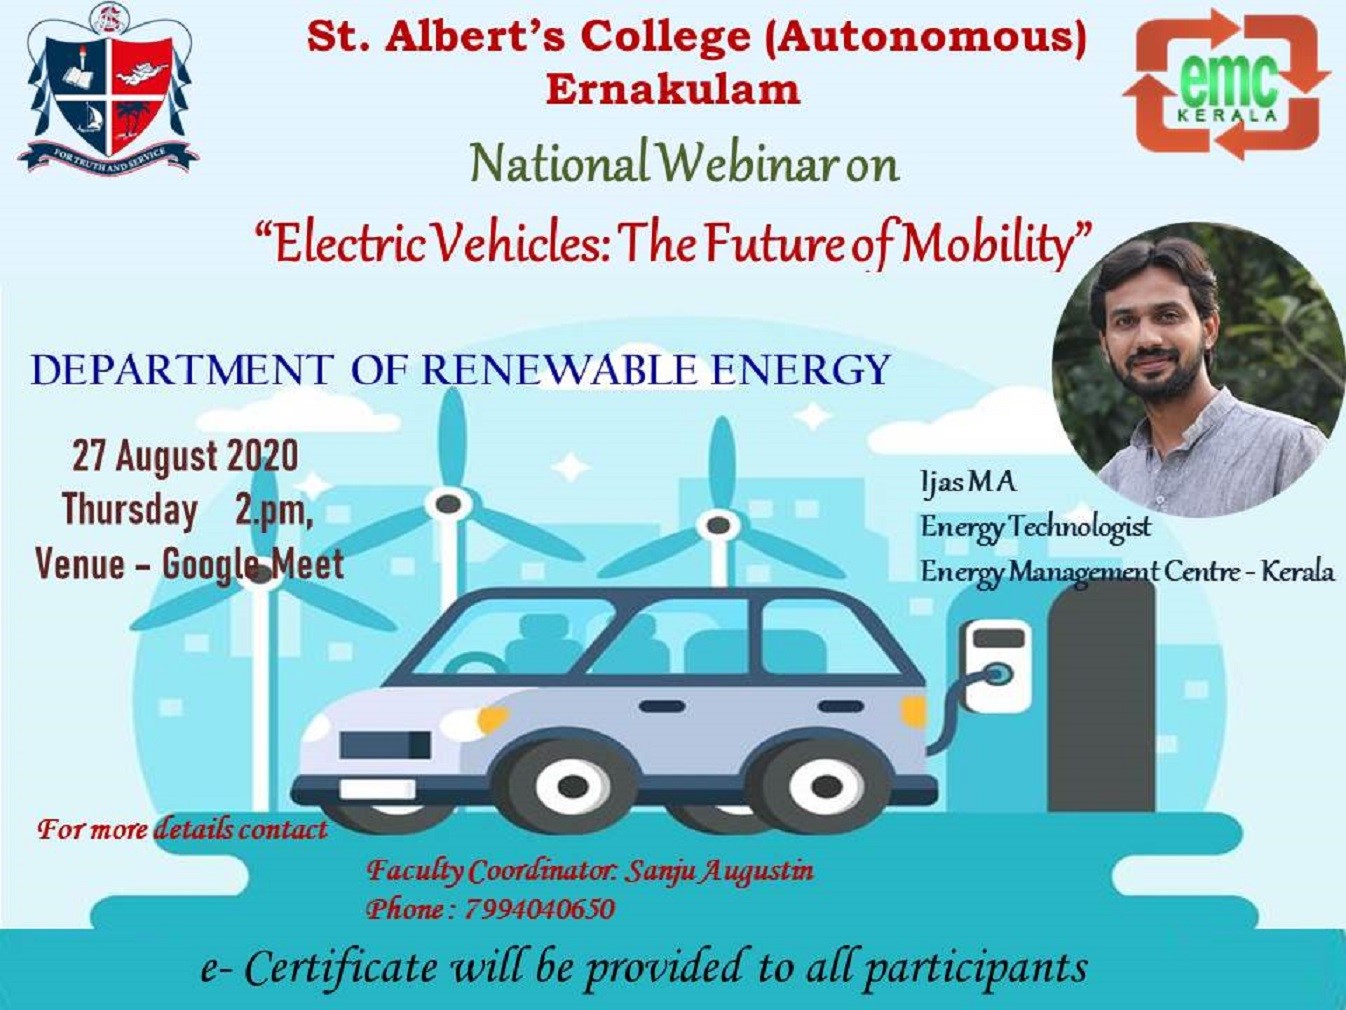 National Webinar on Electric Vehicles: The Future of Mobility